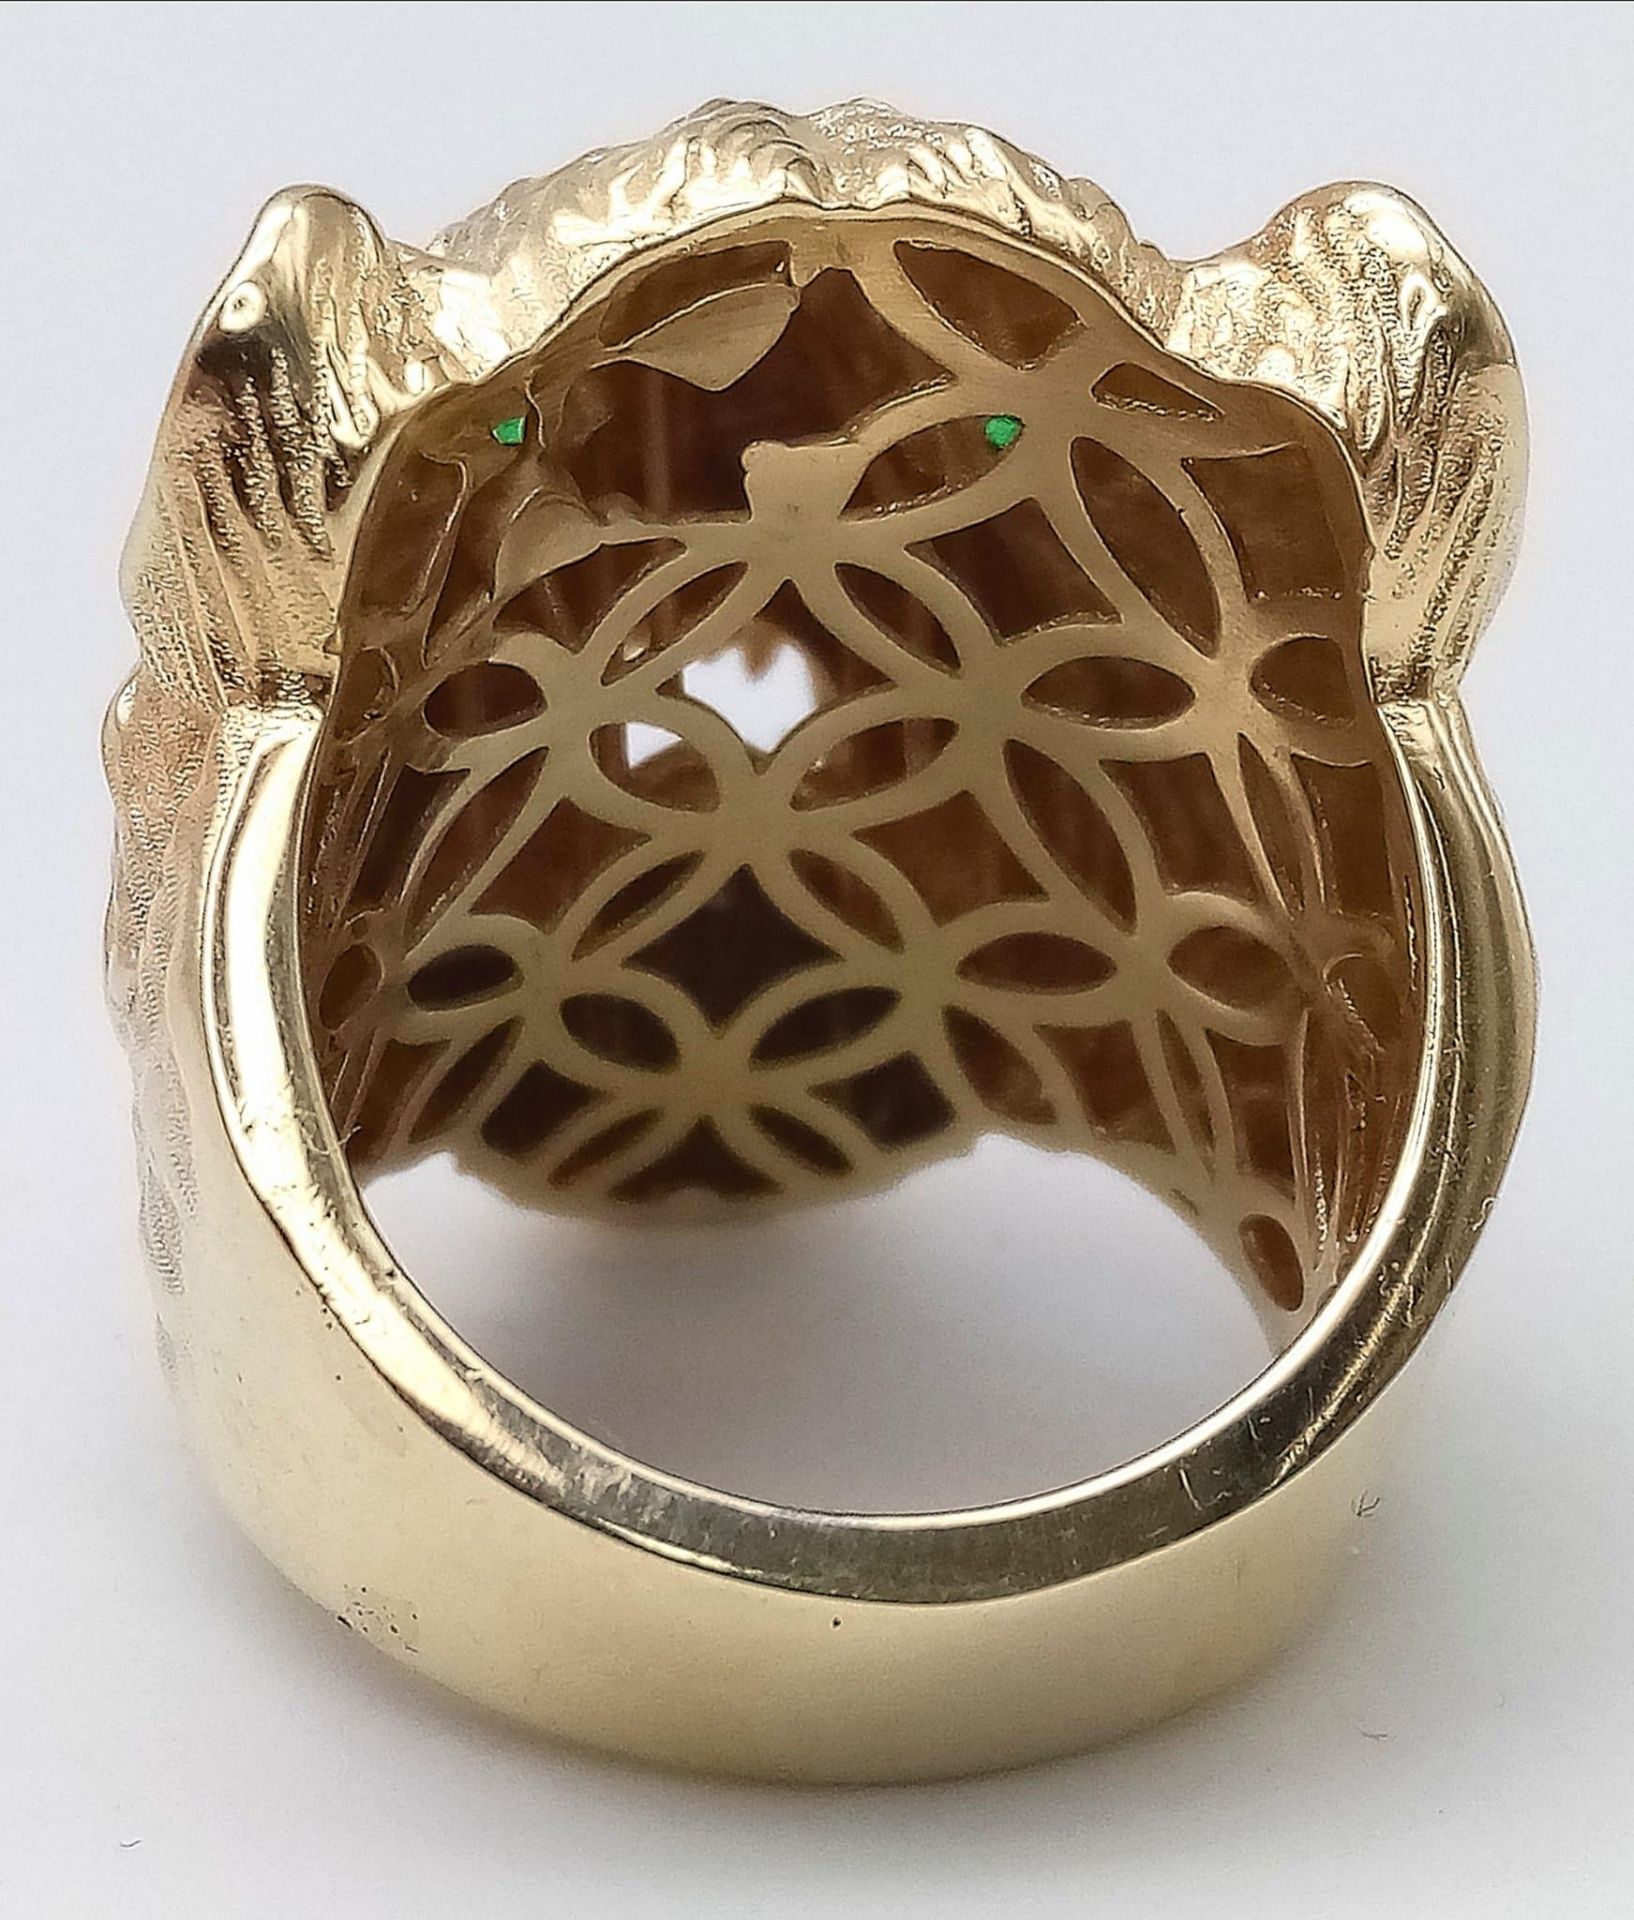 A 9K YELLOW GOLD TIGER / LEOPARD HEAD RING WITH GREEN STONES SET IN THE EYES. 10.8G. SIZE S - Bild 4 aus 5